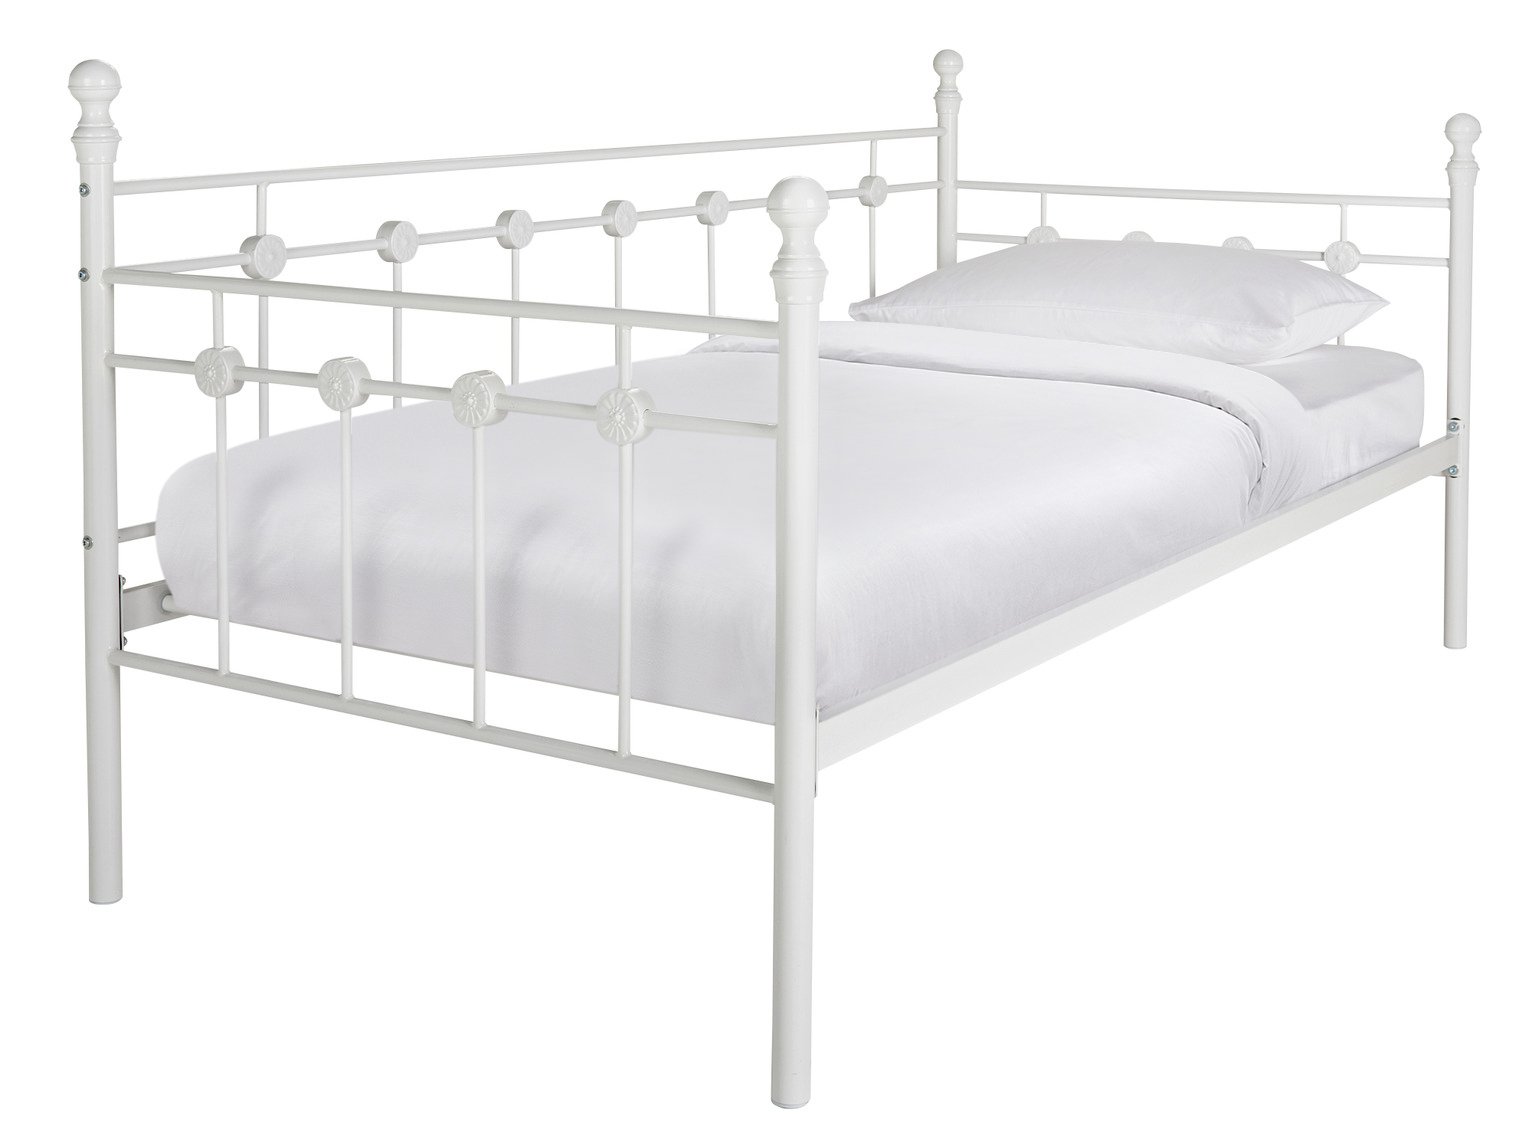 Argos Home Abigail Single Metal Day Bed Frame review